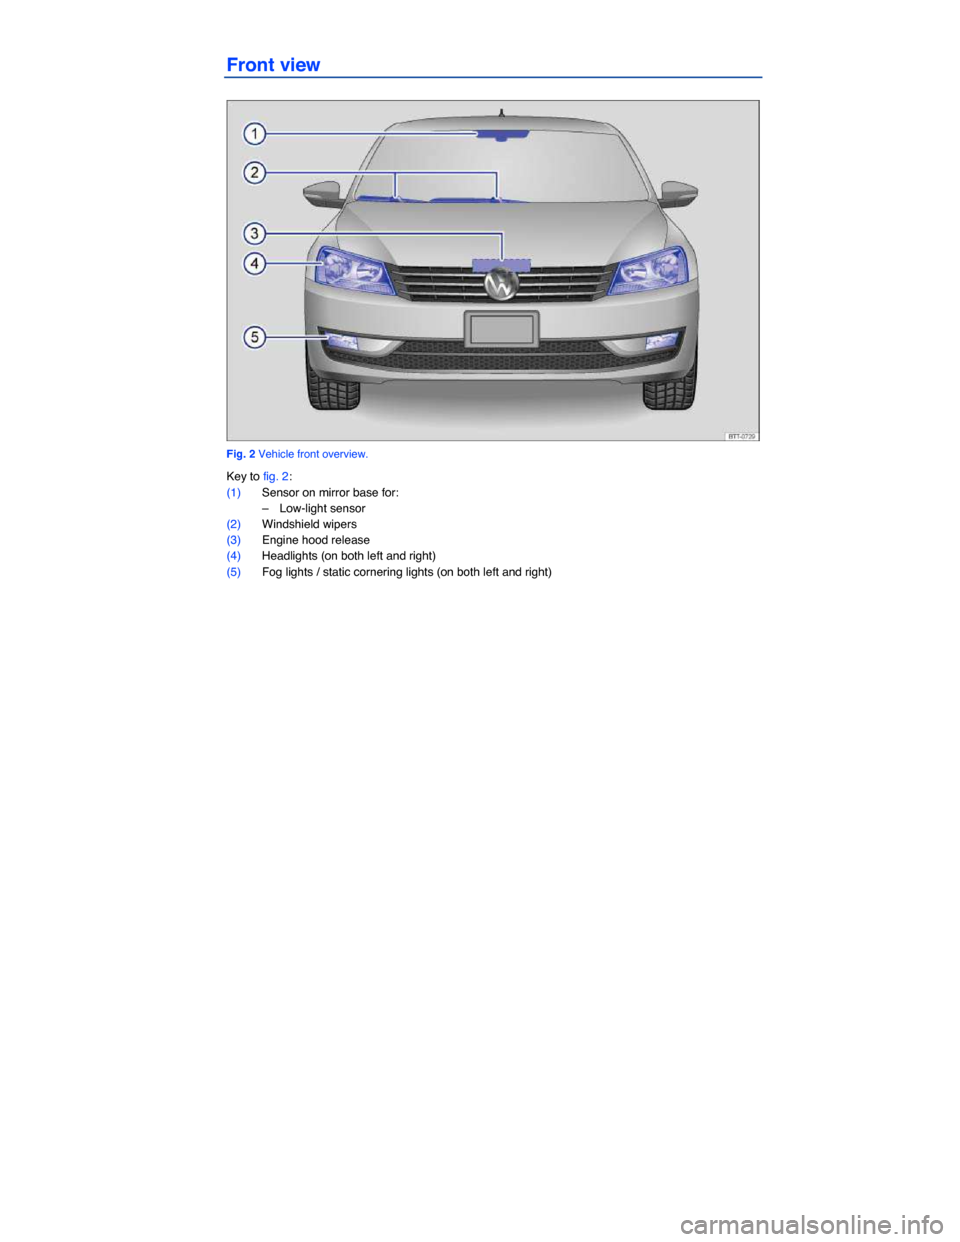 VOLKSWAGEN PASSAT 2014 B8 / 6.G Owners Manual  
Front view 
 
Fig. 2 Vehicle front overview. 
Key to fig. 2: 
(1) Sensor on mirror base for: 
–  Low-light sensor  
(2) Windshield wipers  
(3) Engine hood release  
(4) Headlights (on both left a